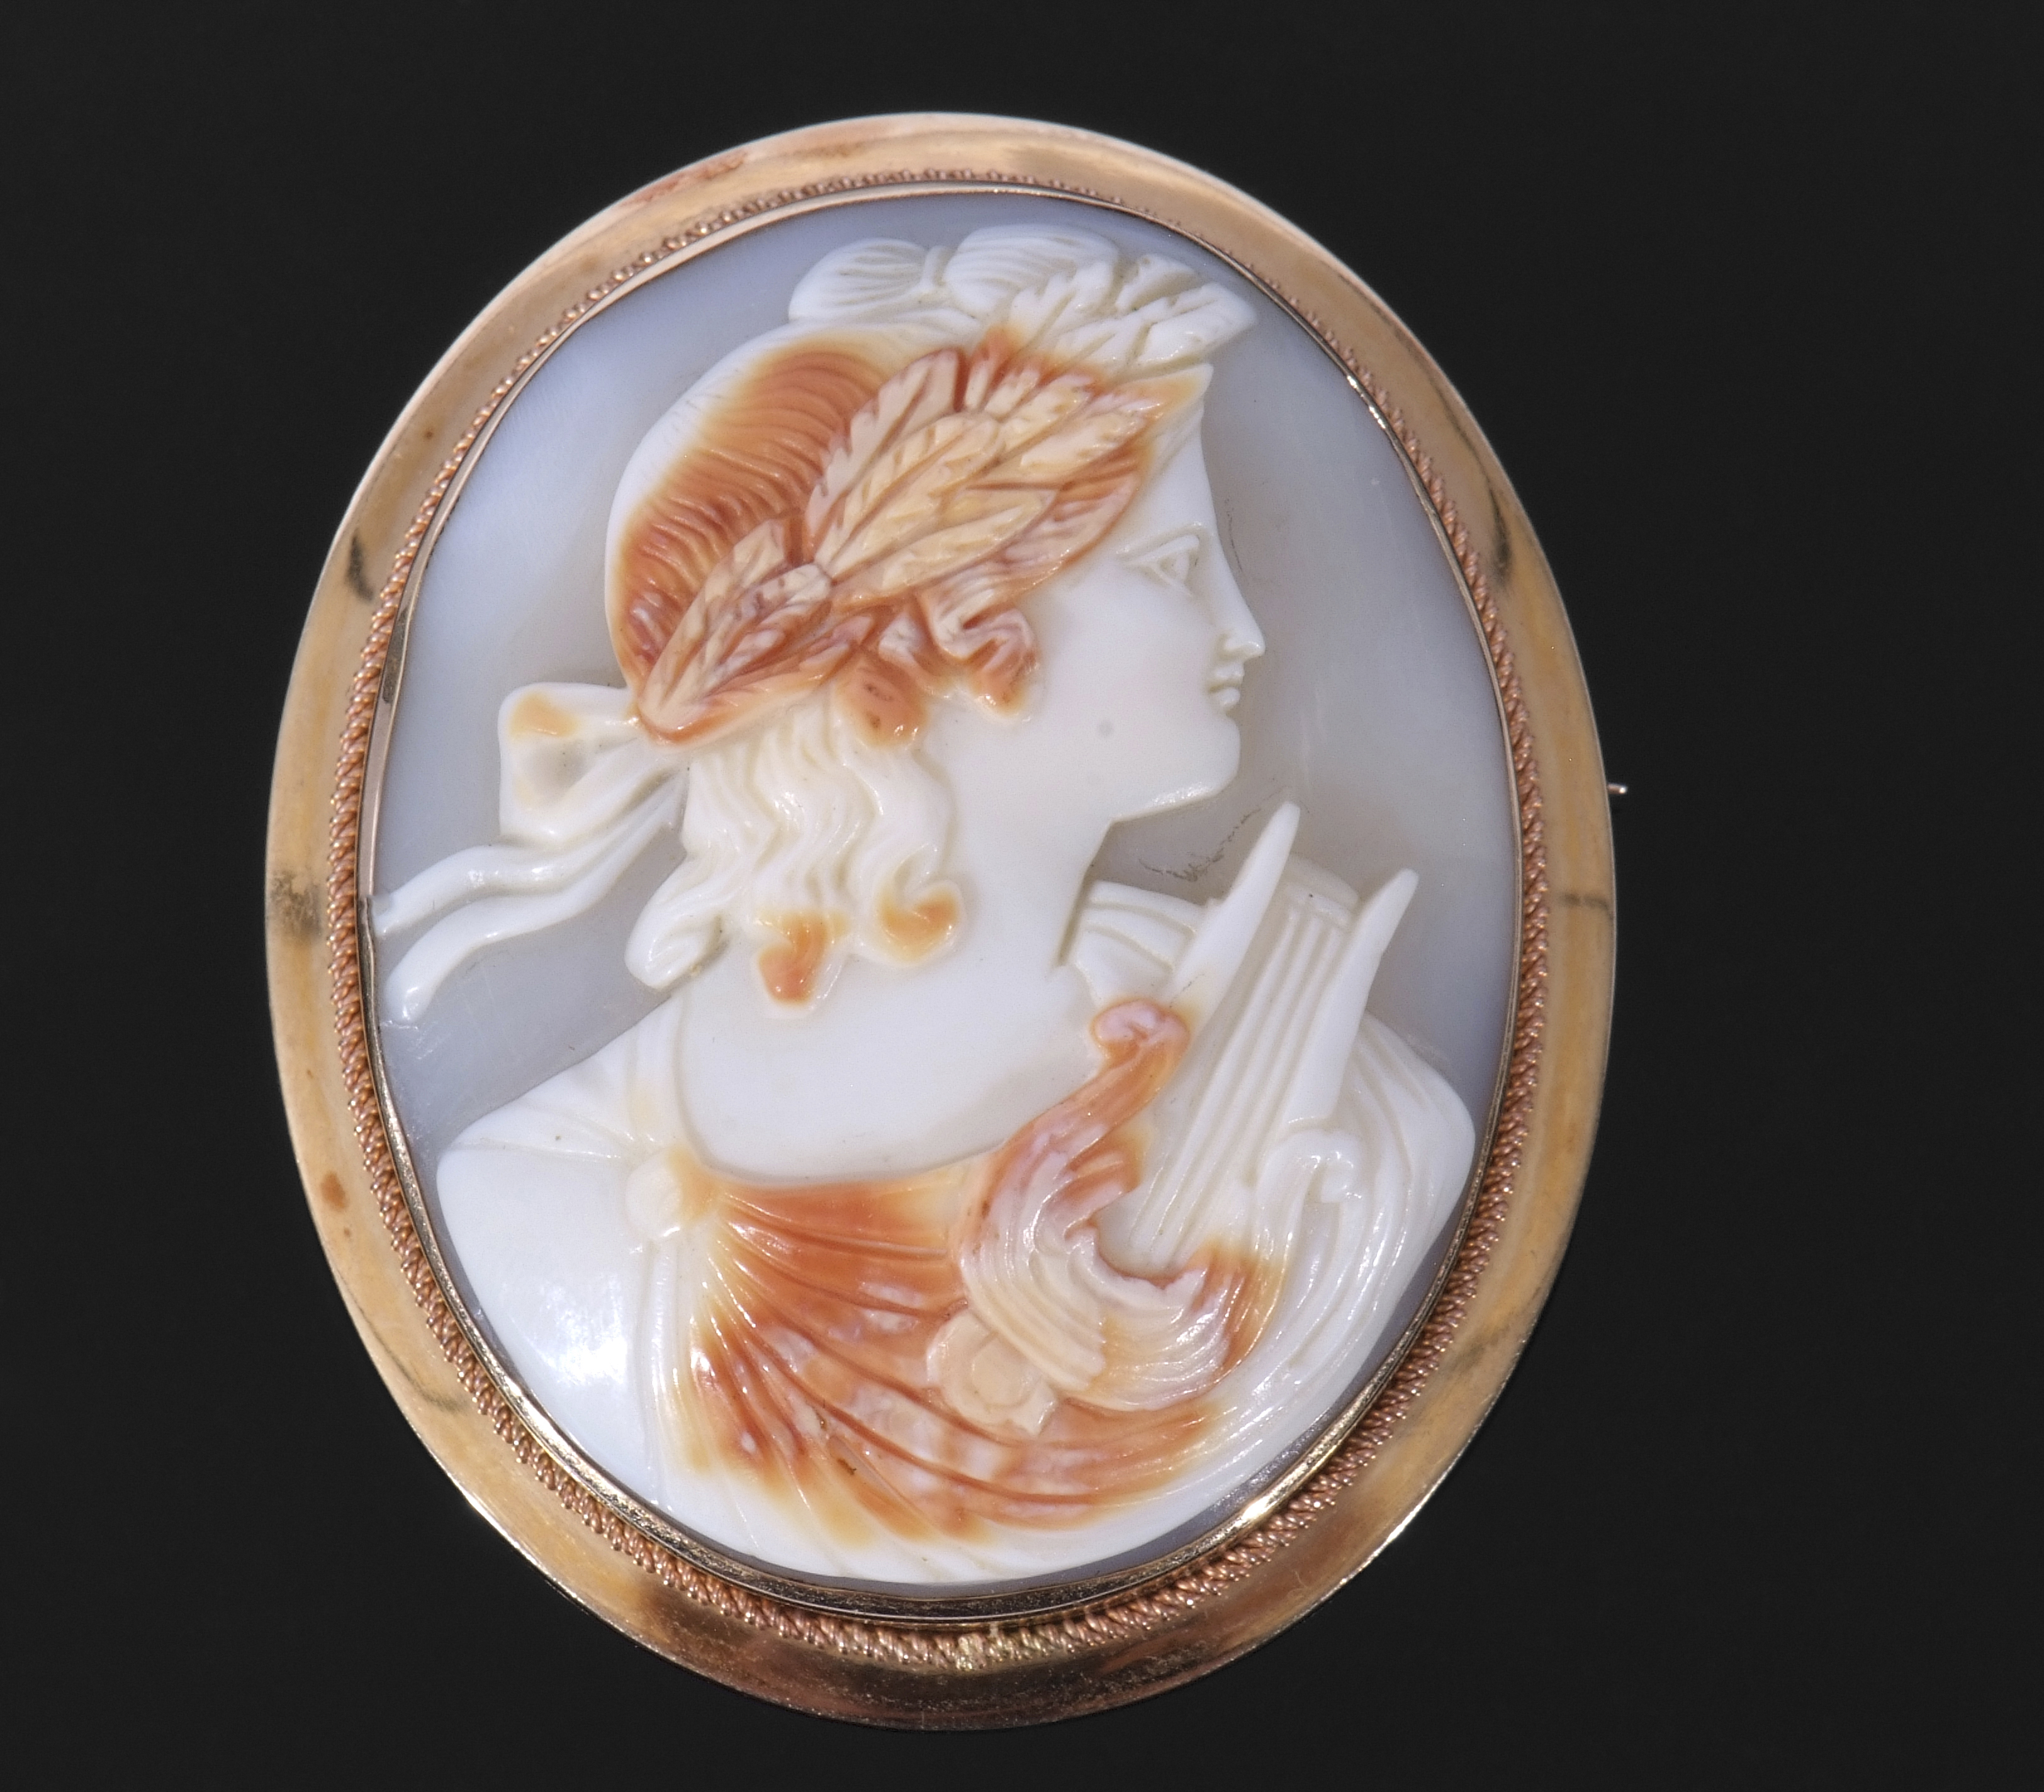 Large oval carved shell cameo depicting a Bacchanalian lady, 6 x 5cm, framed in a 14K stamped mount